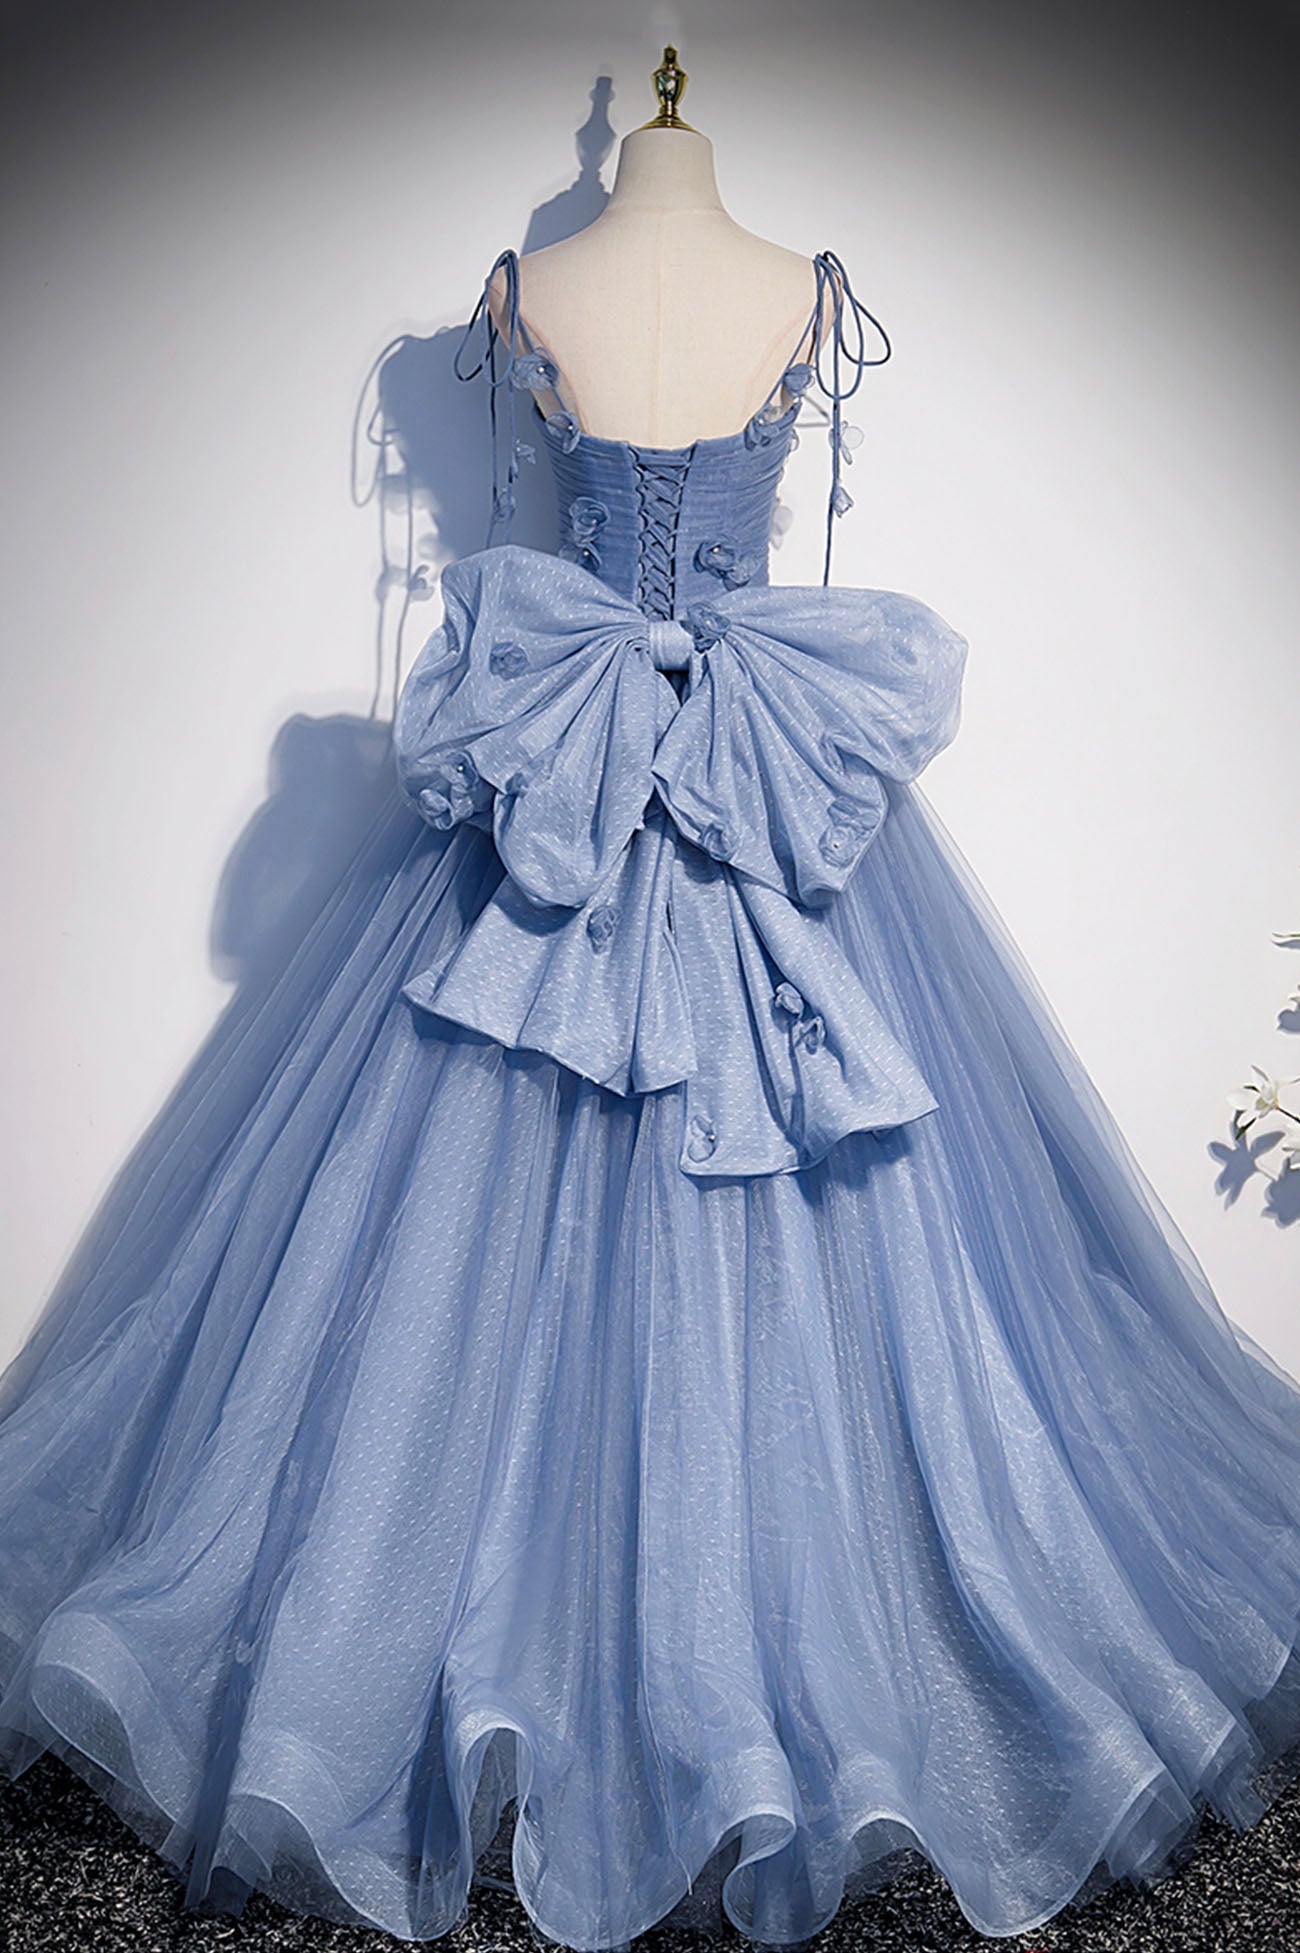 Karla | Blue Tulle Long A-Line Prom Dress Blue Spaghetti Straps Party Dress with Bow